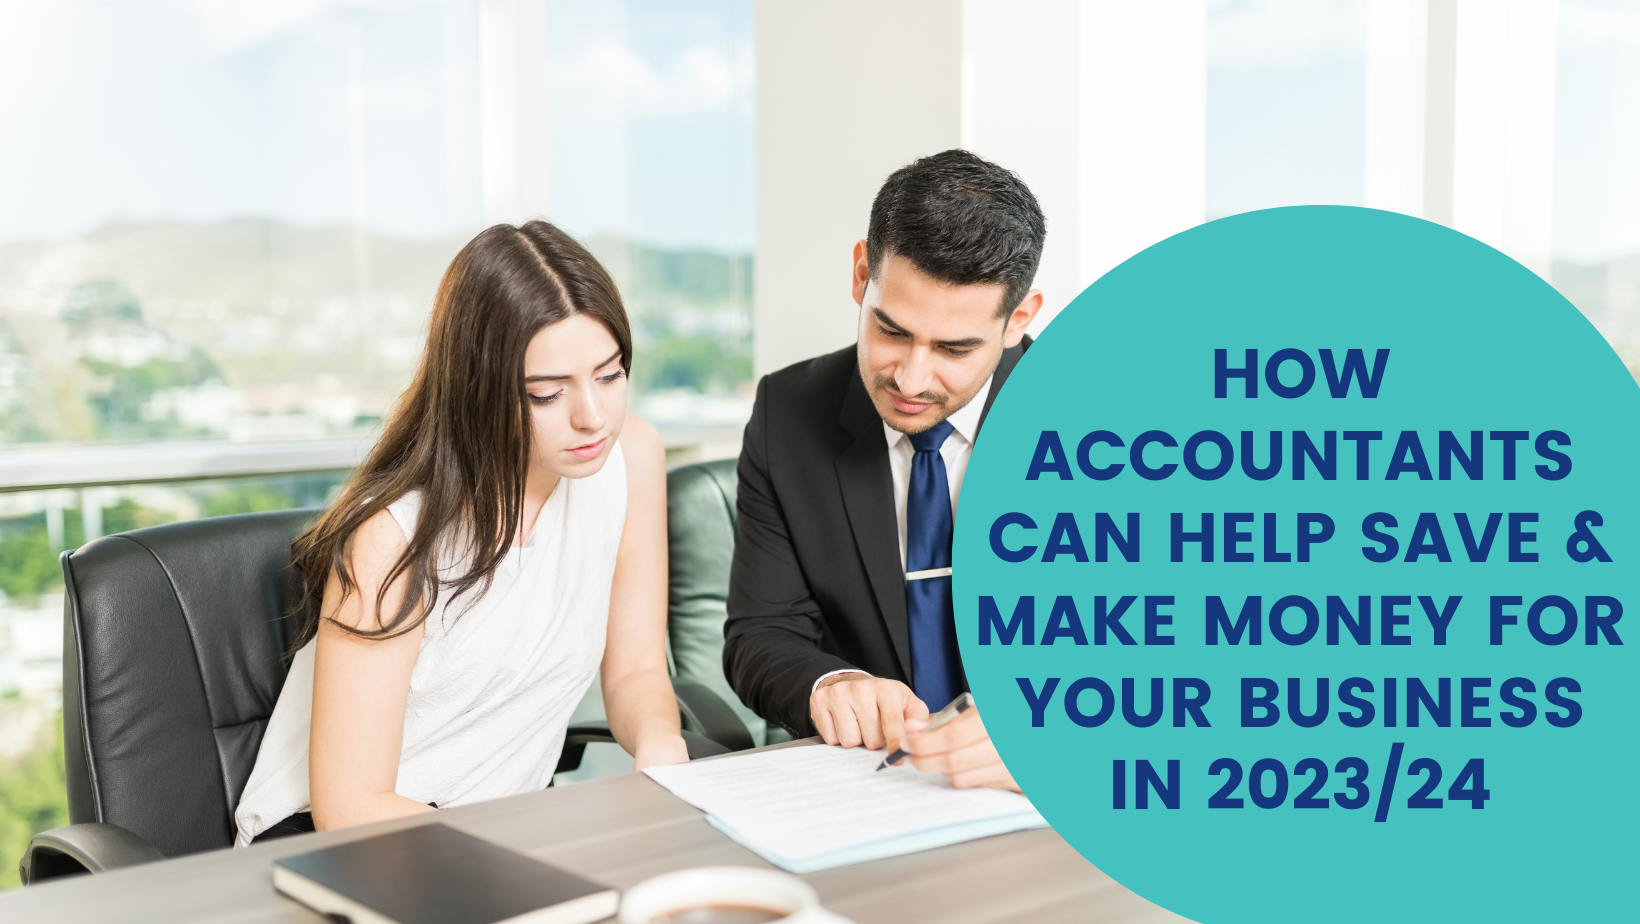 How Accountants Can Help Save and Make Money for Your Business in 2023/24